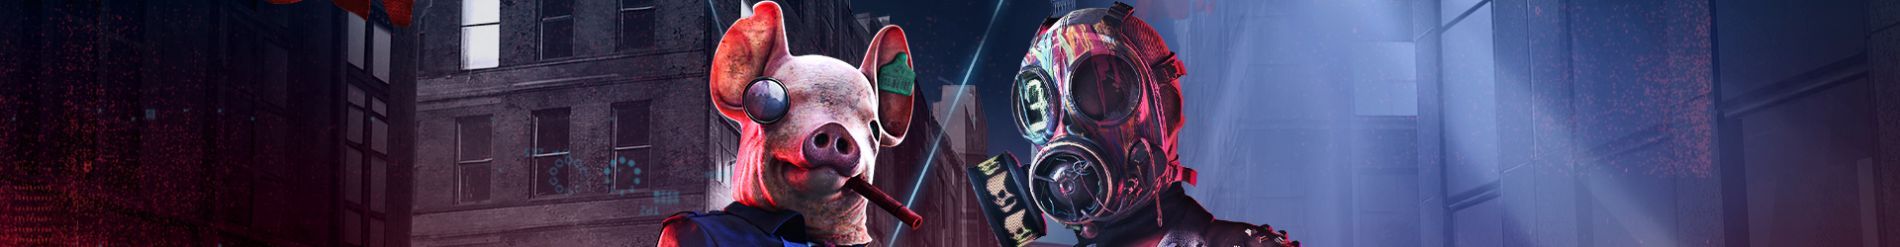 WIN THE NEW WATCH DOGS: LEGION COLLECTOR'S EDITION AND GAME WITH BLASTERJAXX